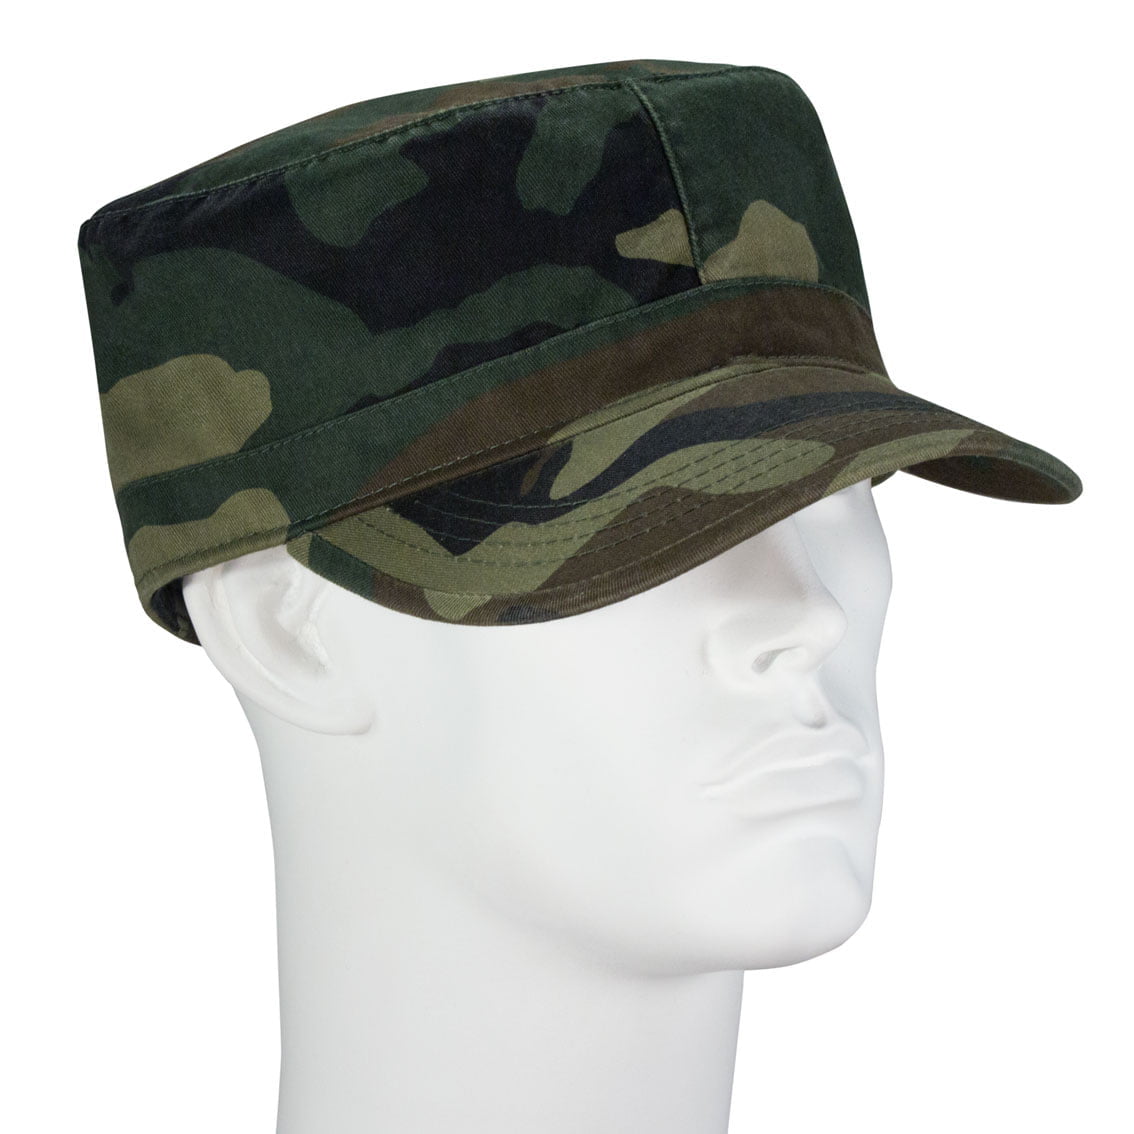 12pcs Woodland Castro Military Fatigue Army Hats - Fitted - Unconstructed - 100% Cotton - Bulk by the Dozen - Wholesale